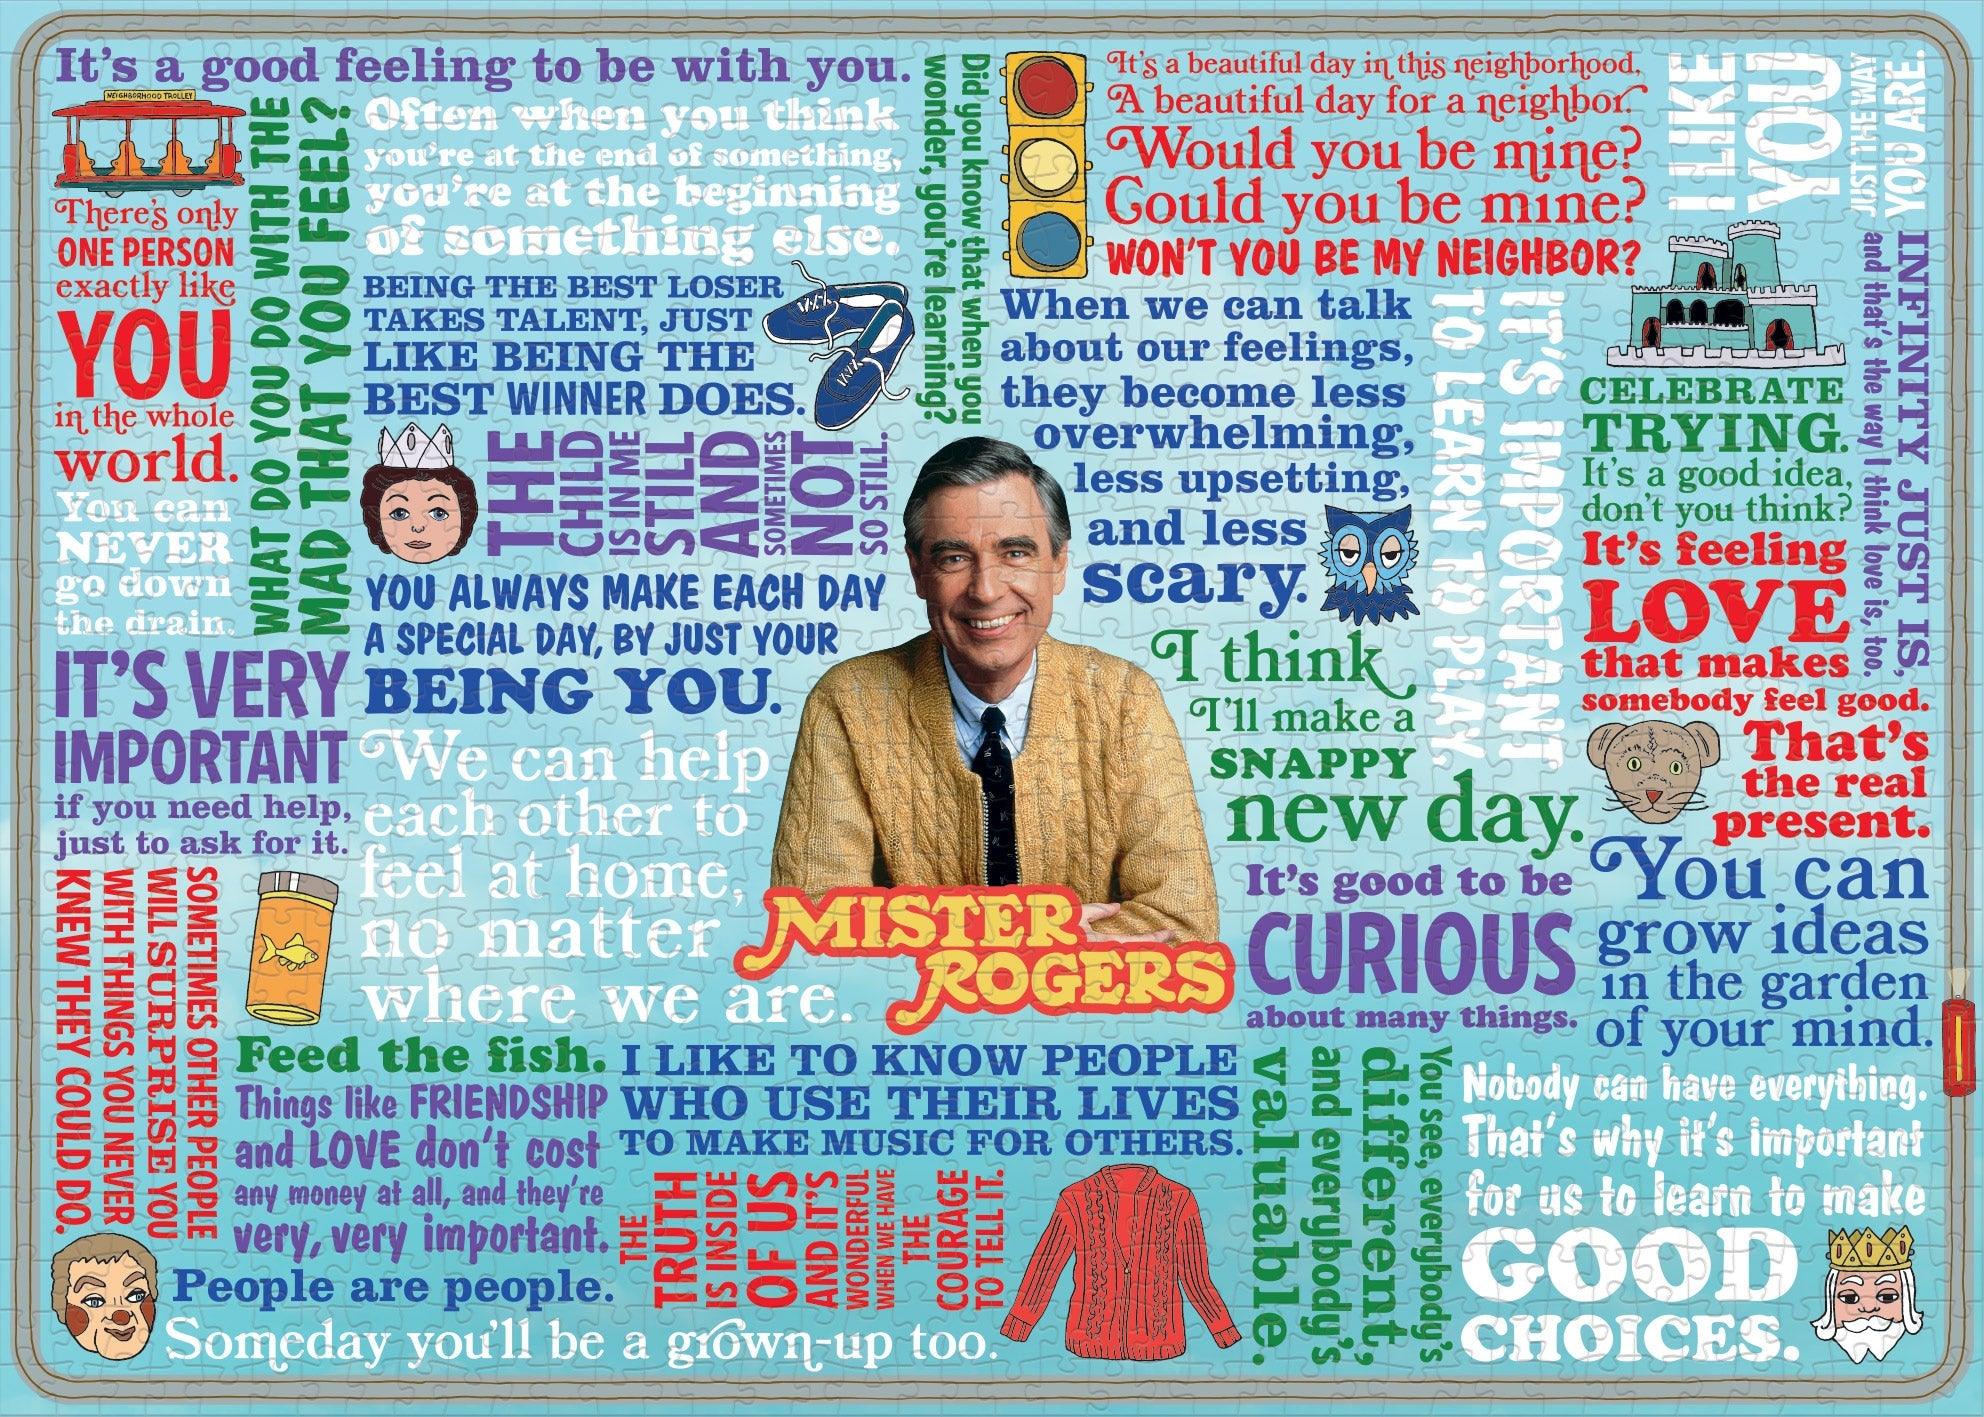 Product photo of Mister Rogers Jigsaw Puzzle, a novelty gift manufactured by The Unemployed Philosophers Guild.